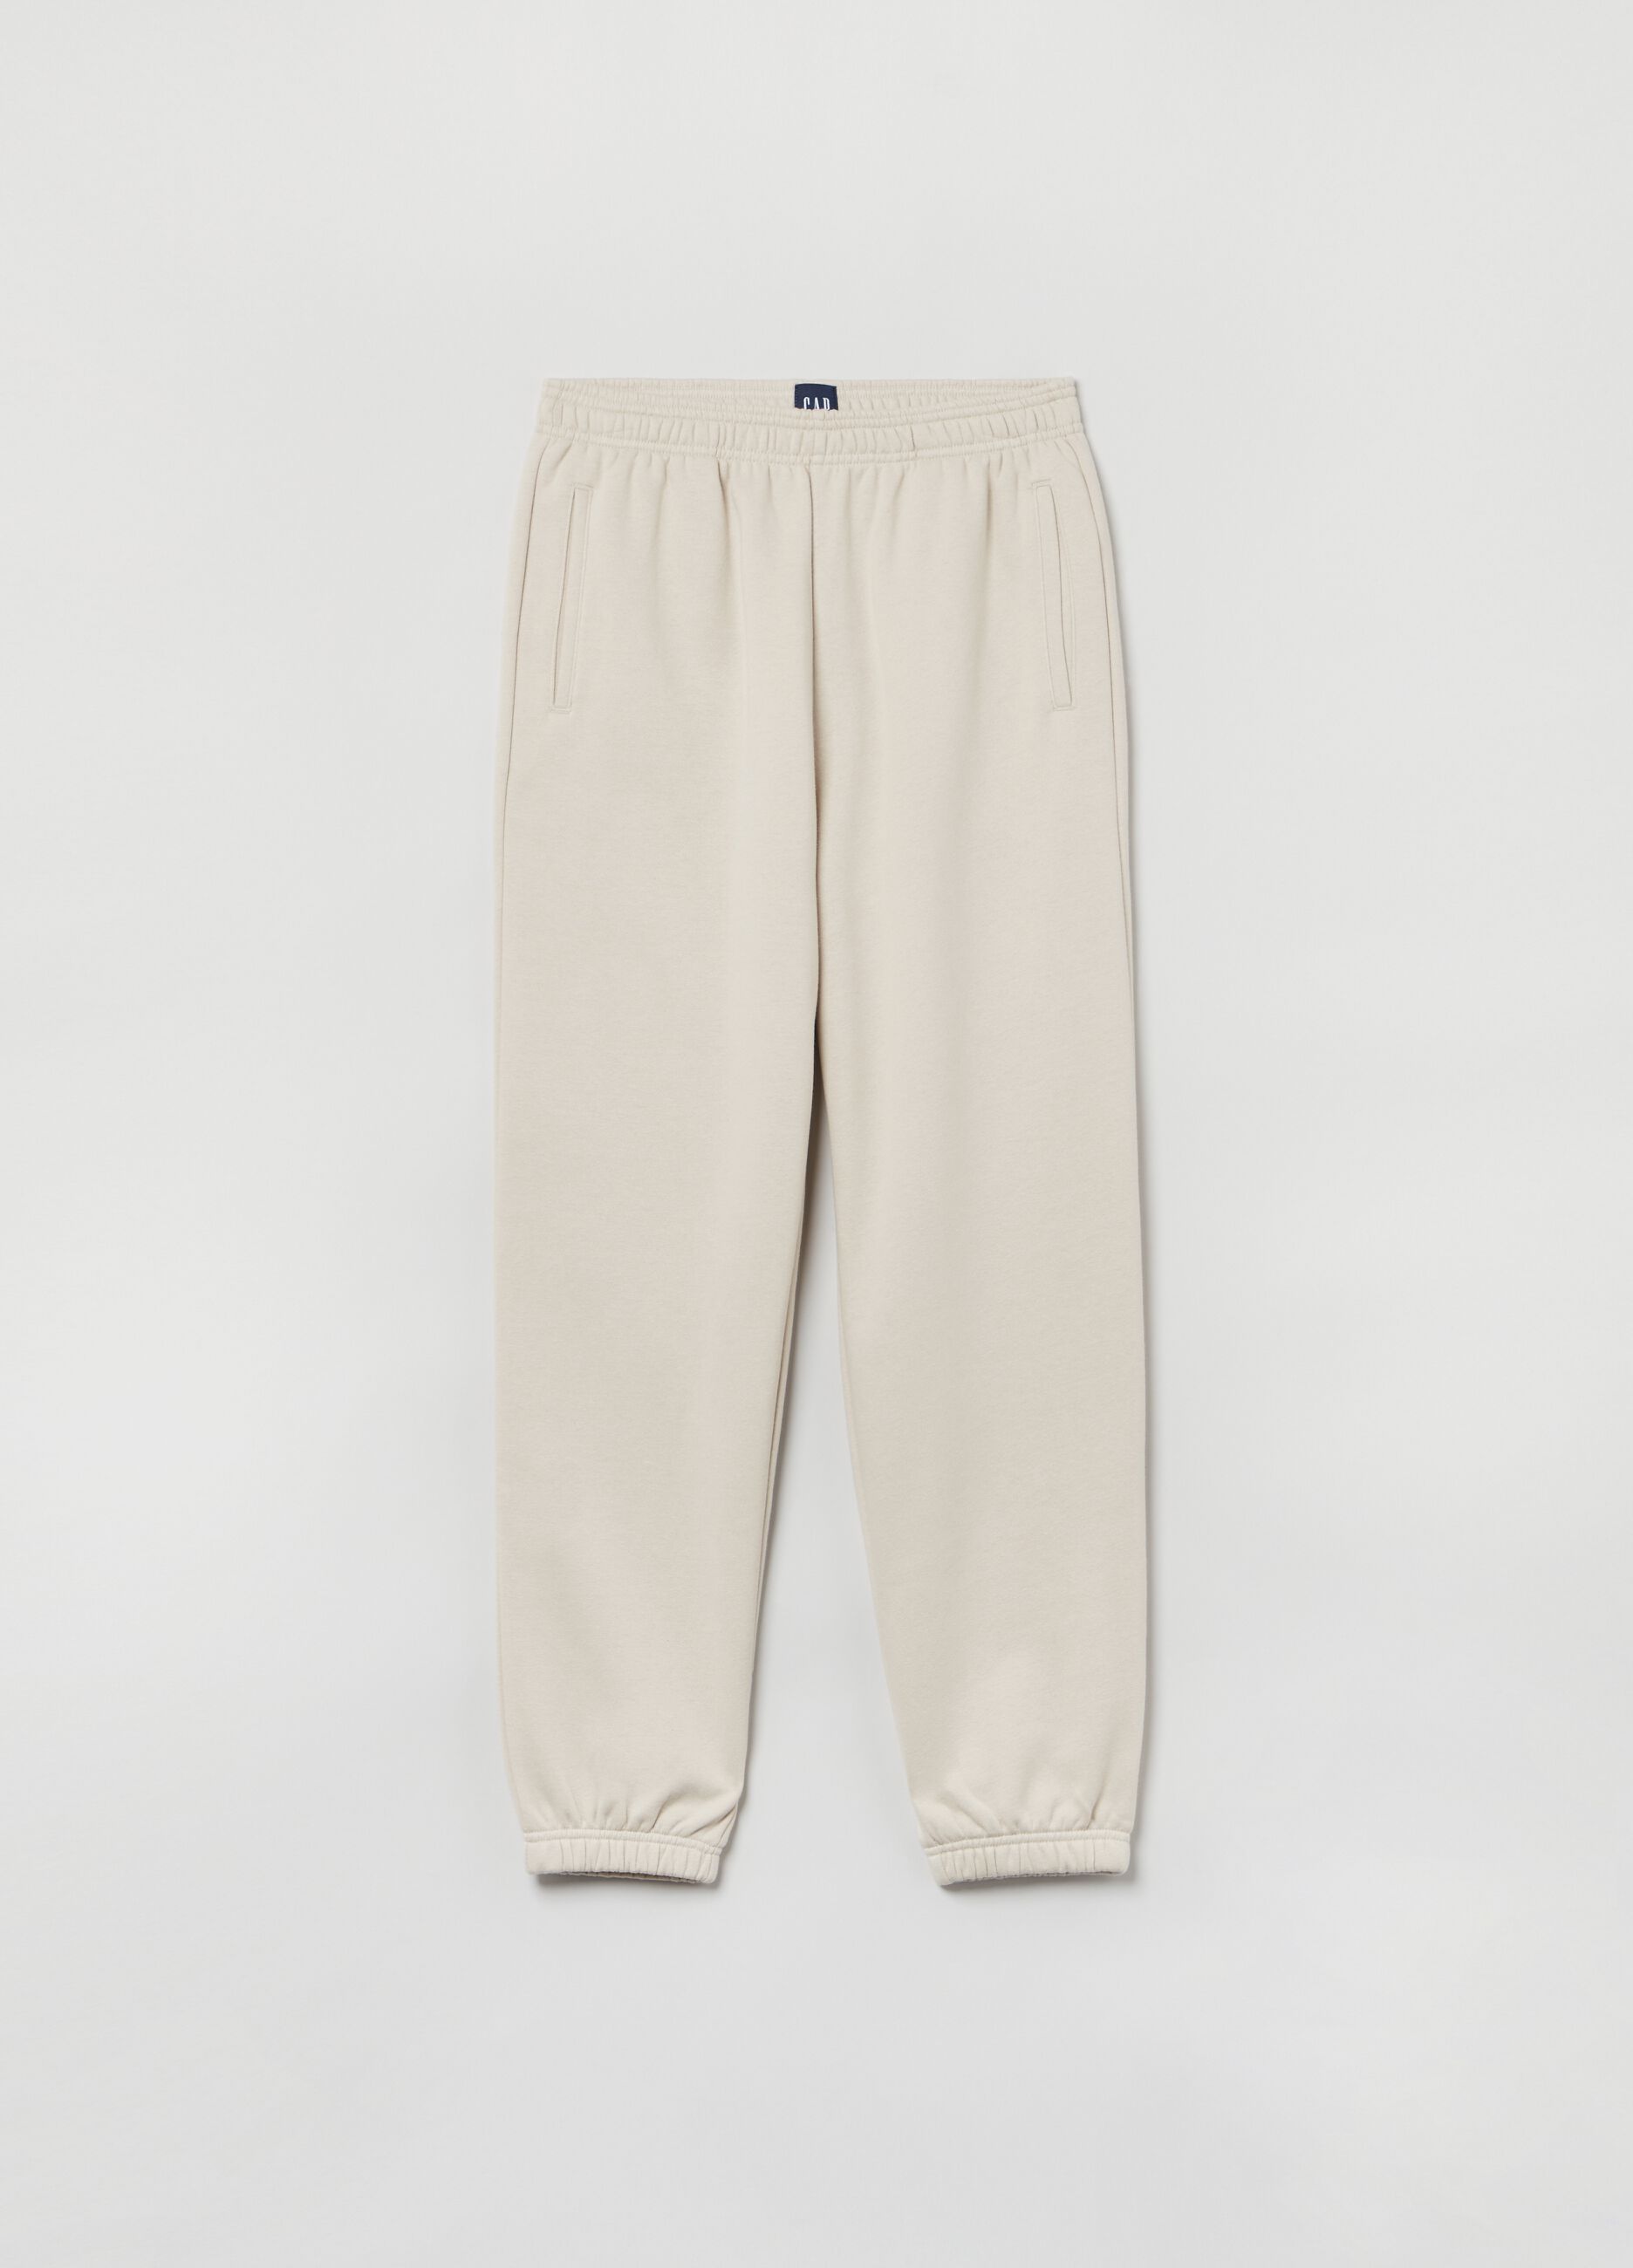 High-rise, easy-fit joggers in plush_1